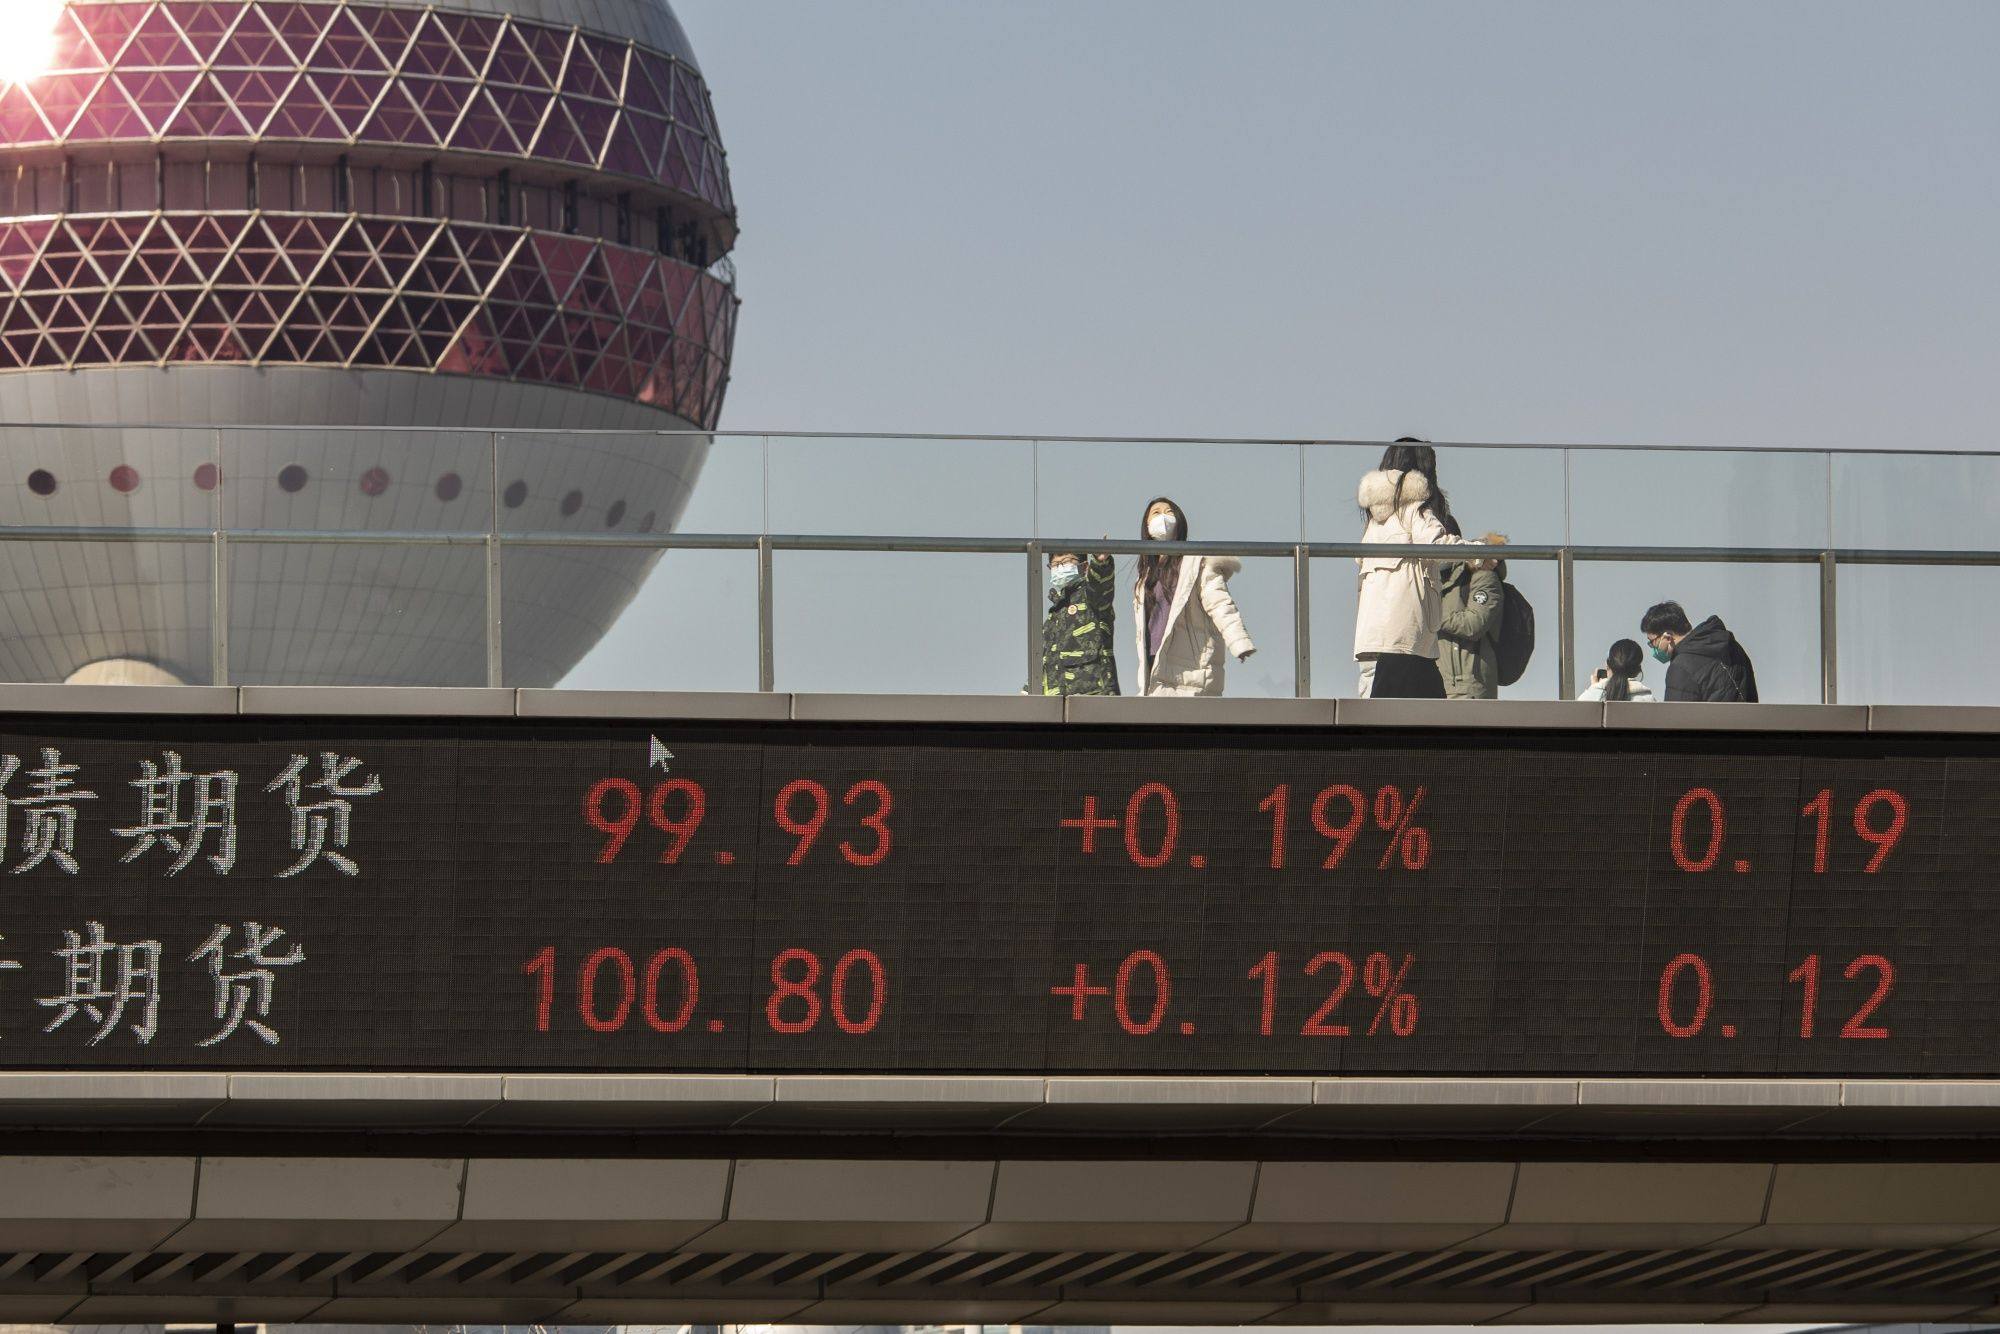 Futures data is displayed on a stock ticker in Pudong’s Lujiazui Financial District in Shanghai, China, on January 30. Domestic investors are waiting for March, when the annual meetings of the NPC and CPPCC will set the economic and market tone for the coming year. Photo: Bloomberg